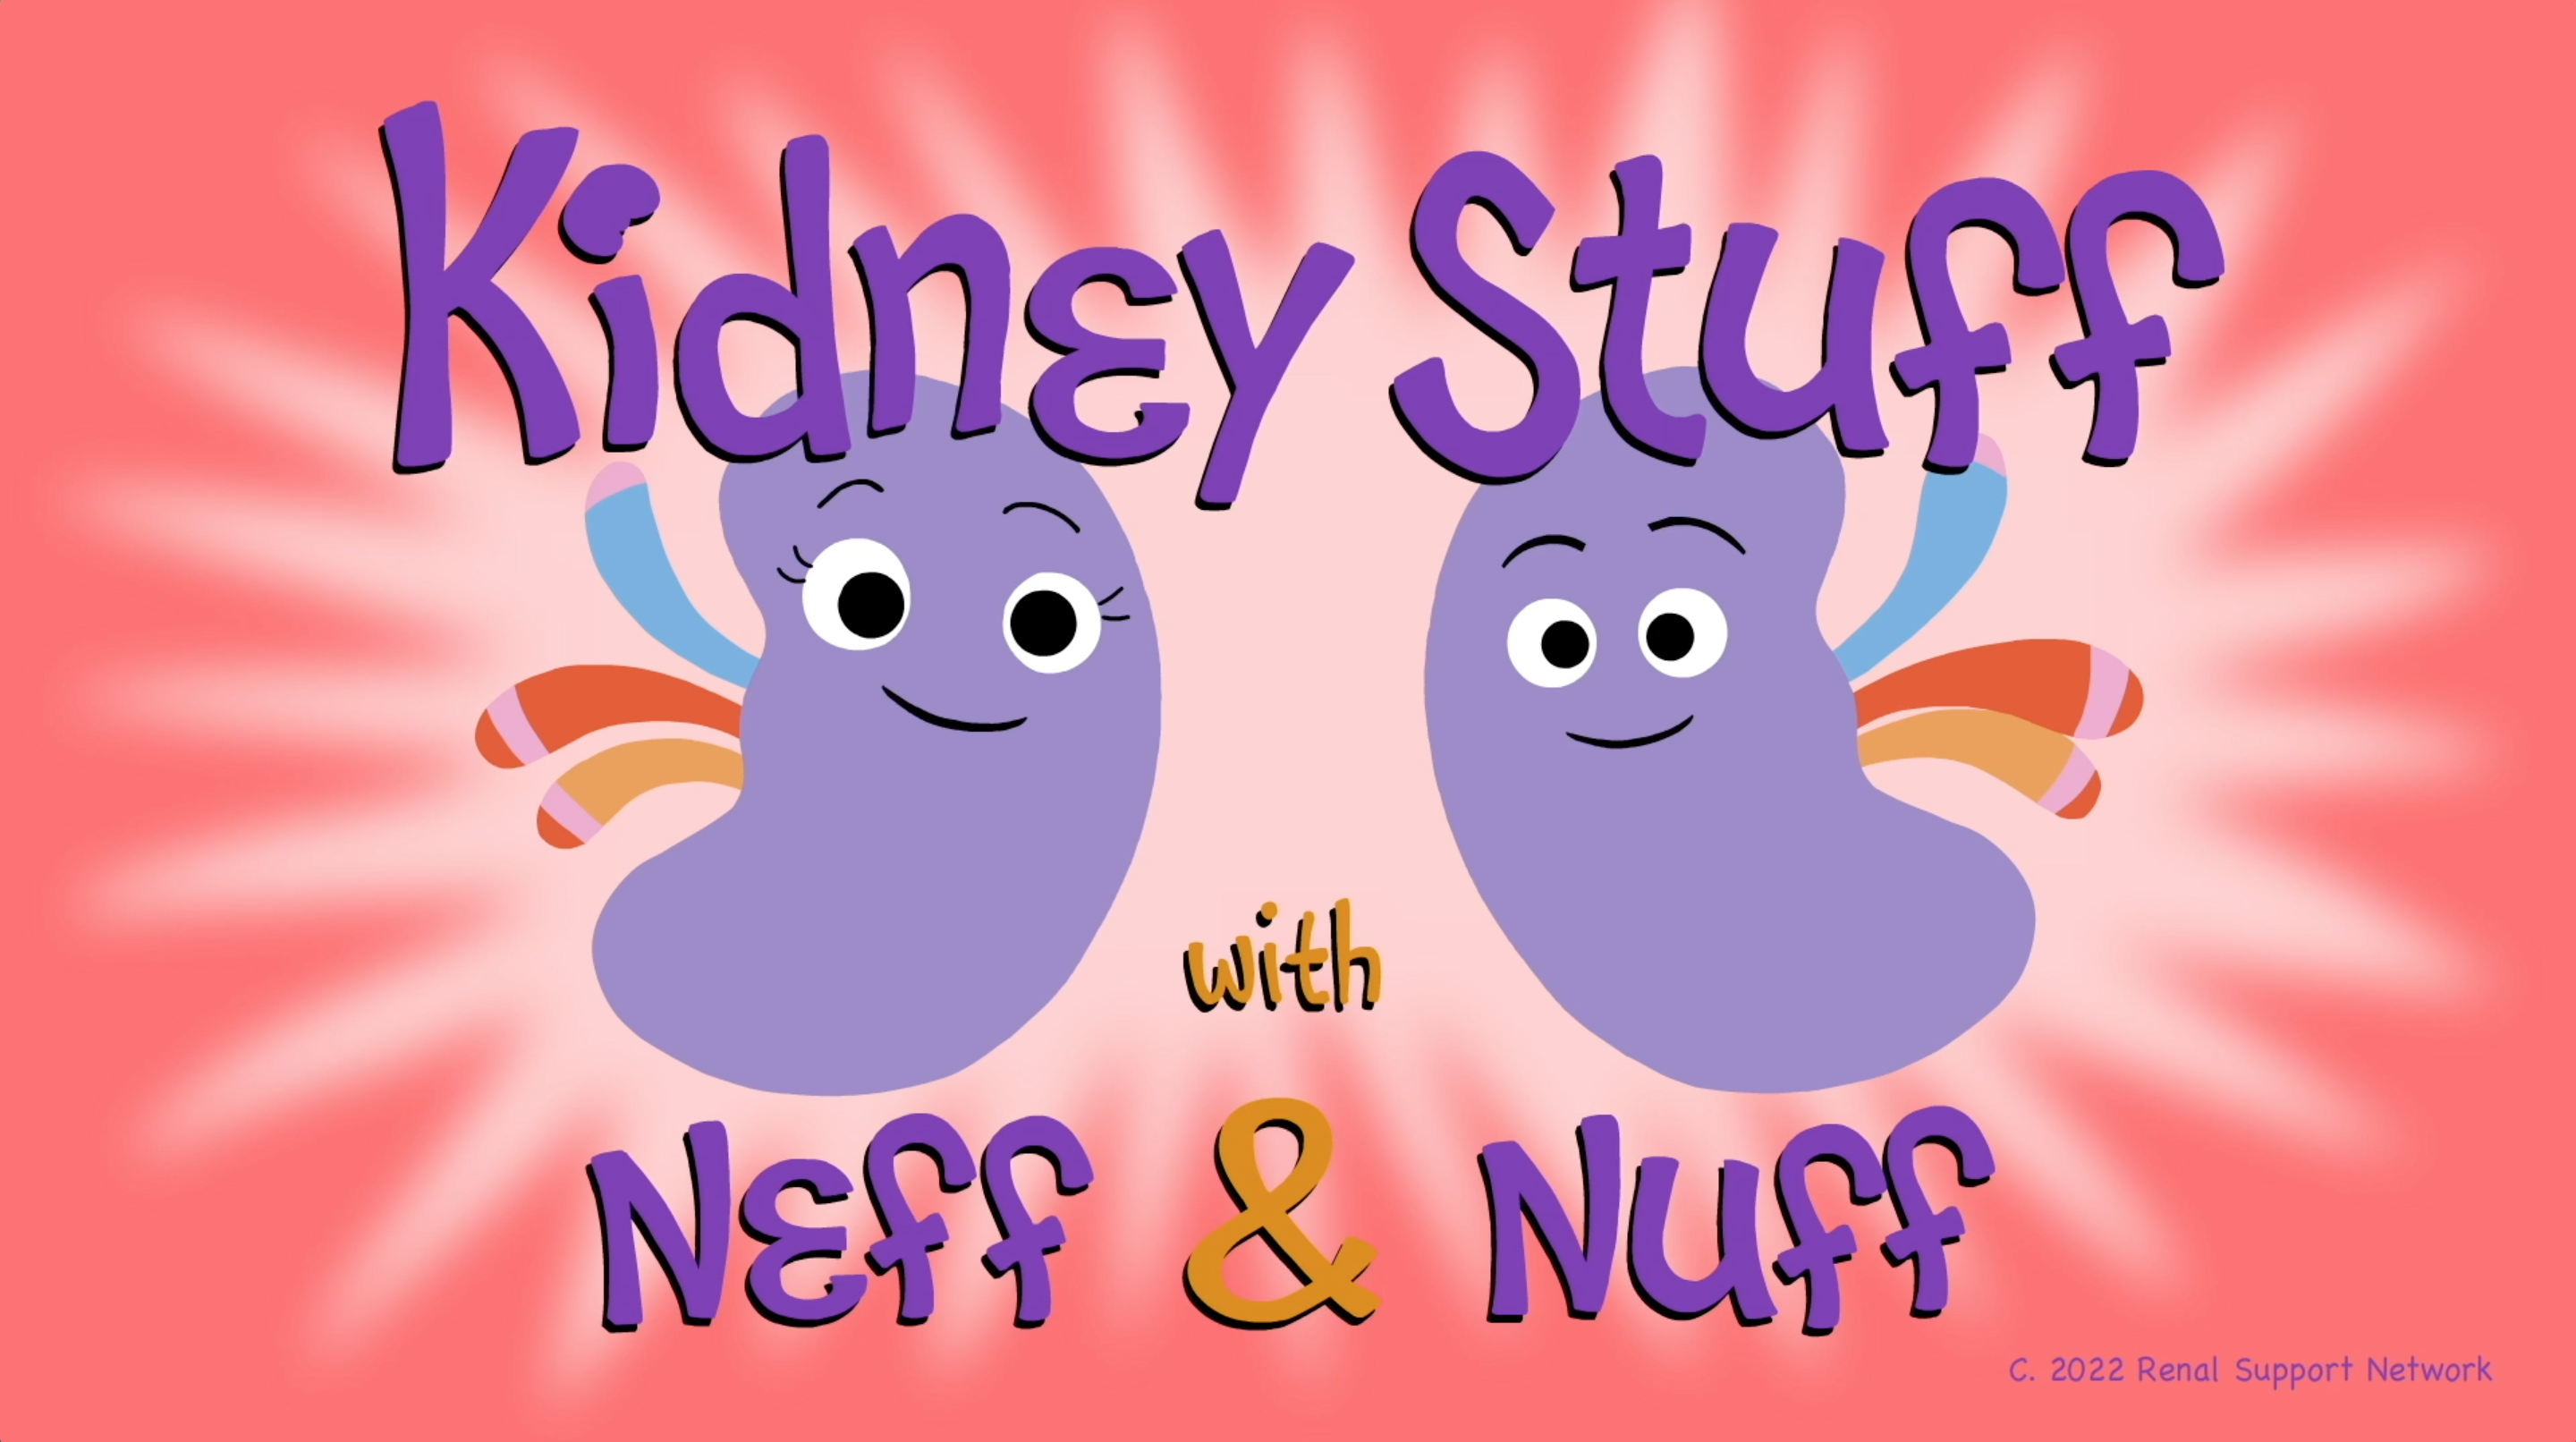 Get the Scoop on 'Kidney Stuff with Neff & Nuff' Animated Video Series